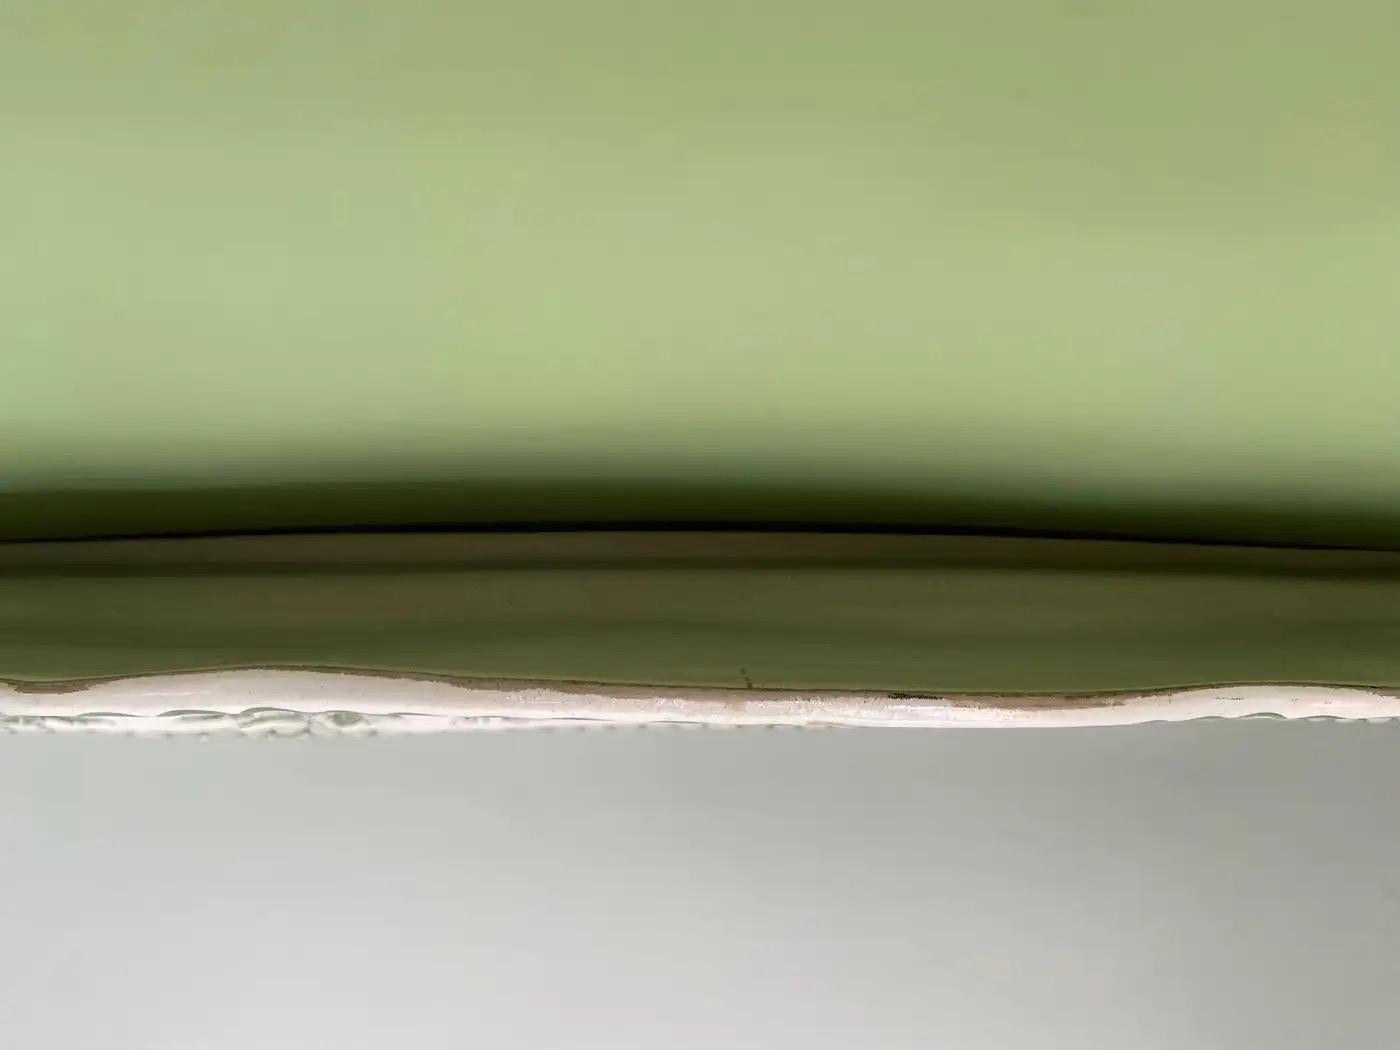 Antique Oblong Ceramic Wall Platter in White and Green, France, 19th Century For Sale 4